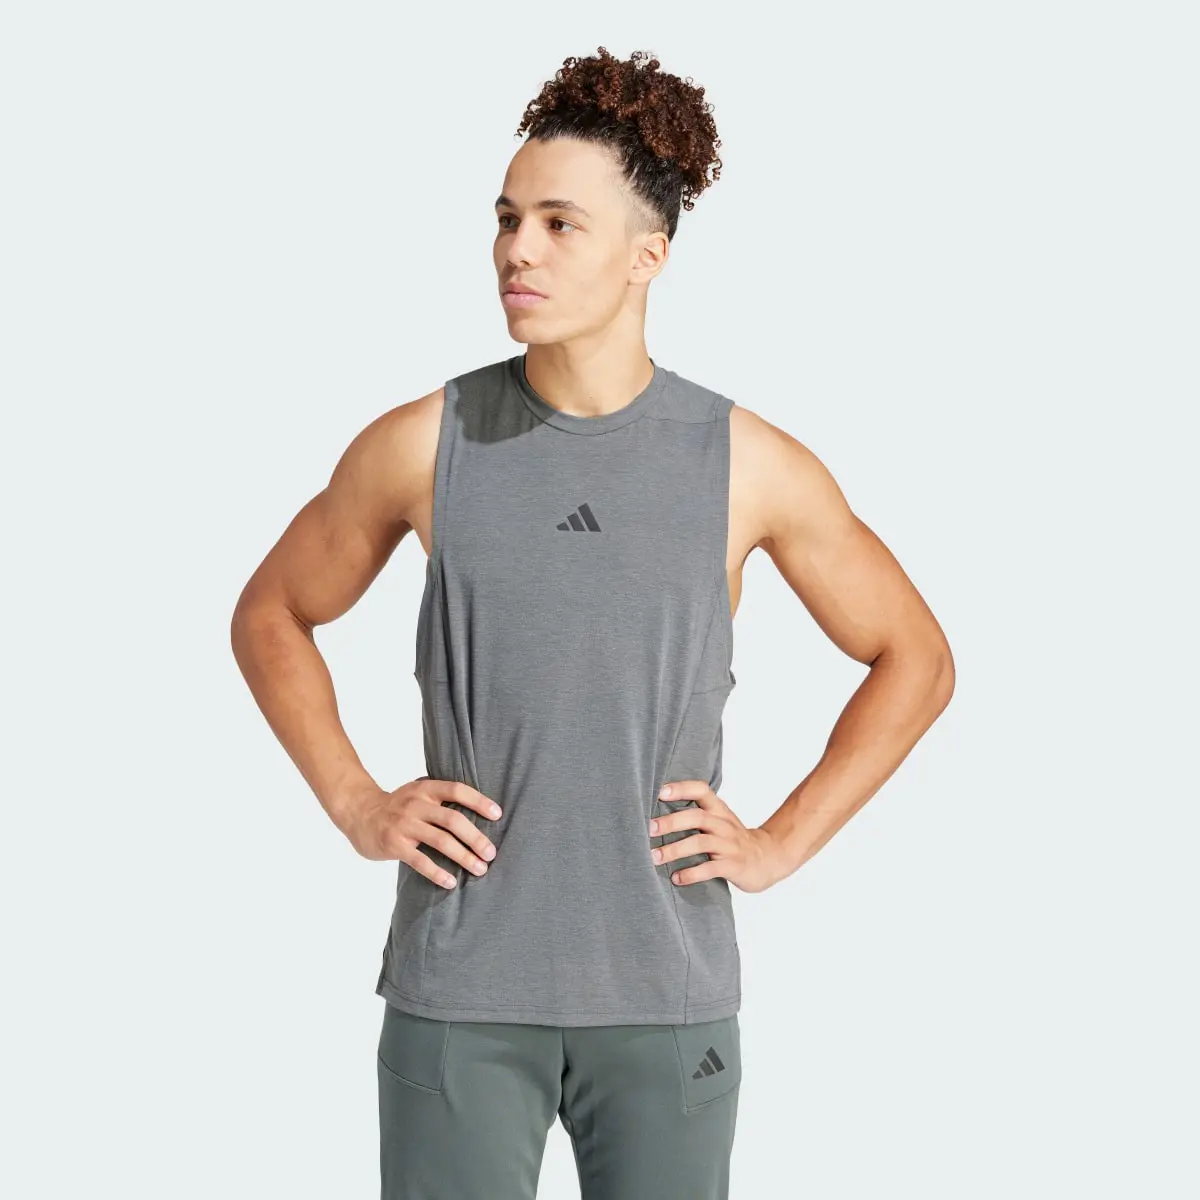 Adidas Designed for Training Workout Tank Top. 2